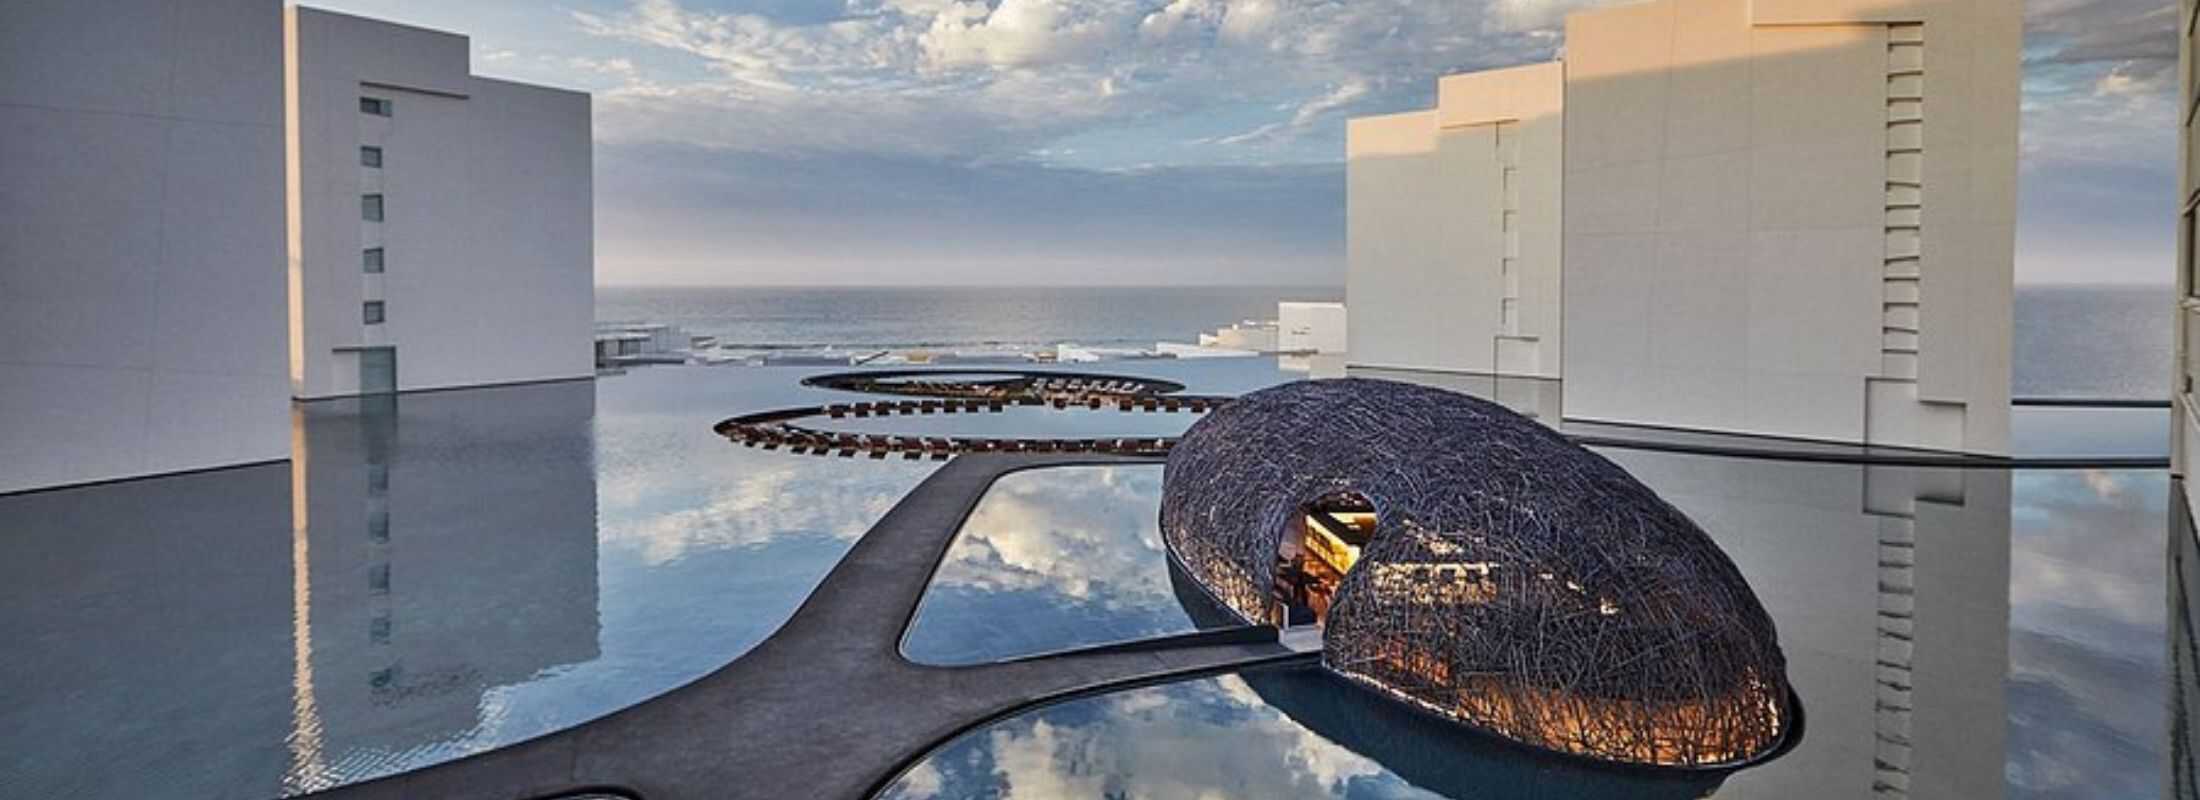 Hotel viceroy in cabo